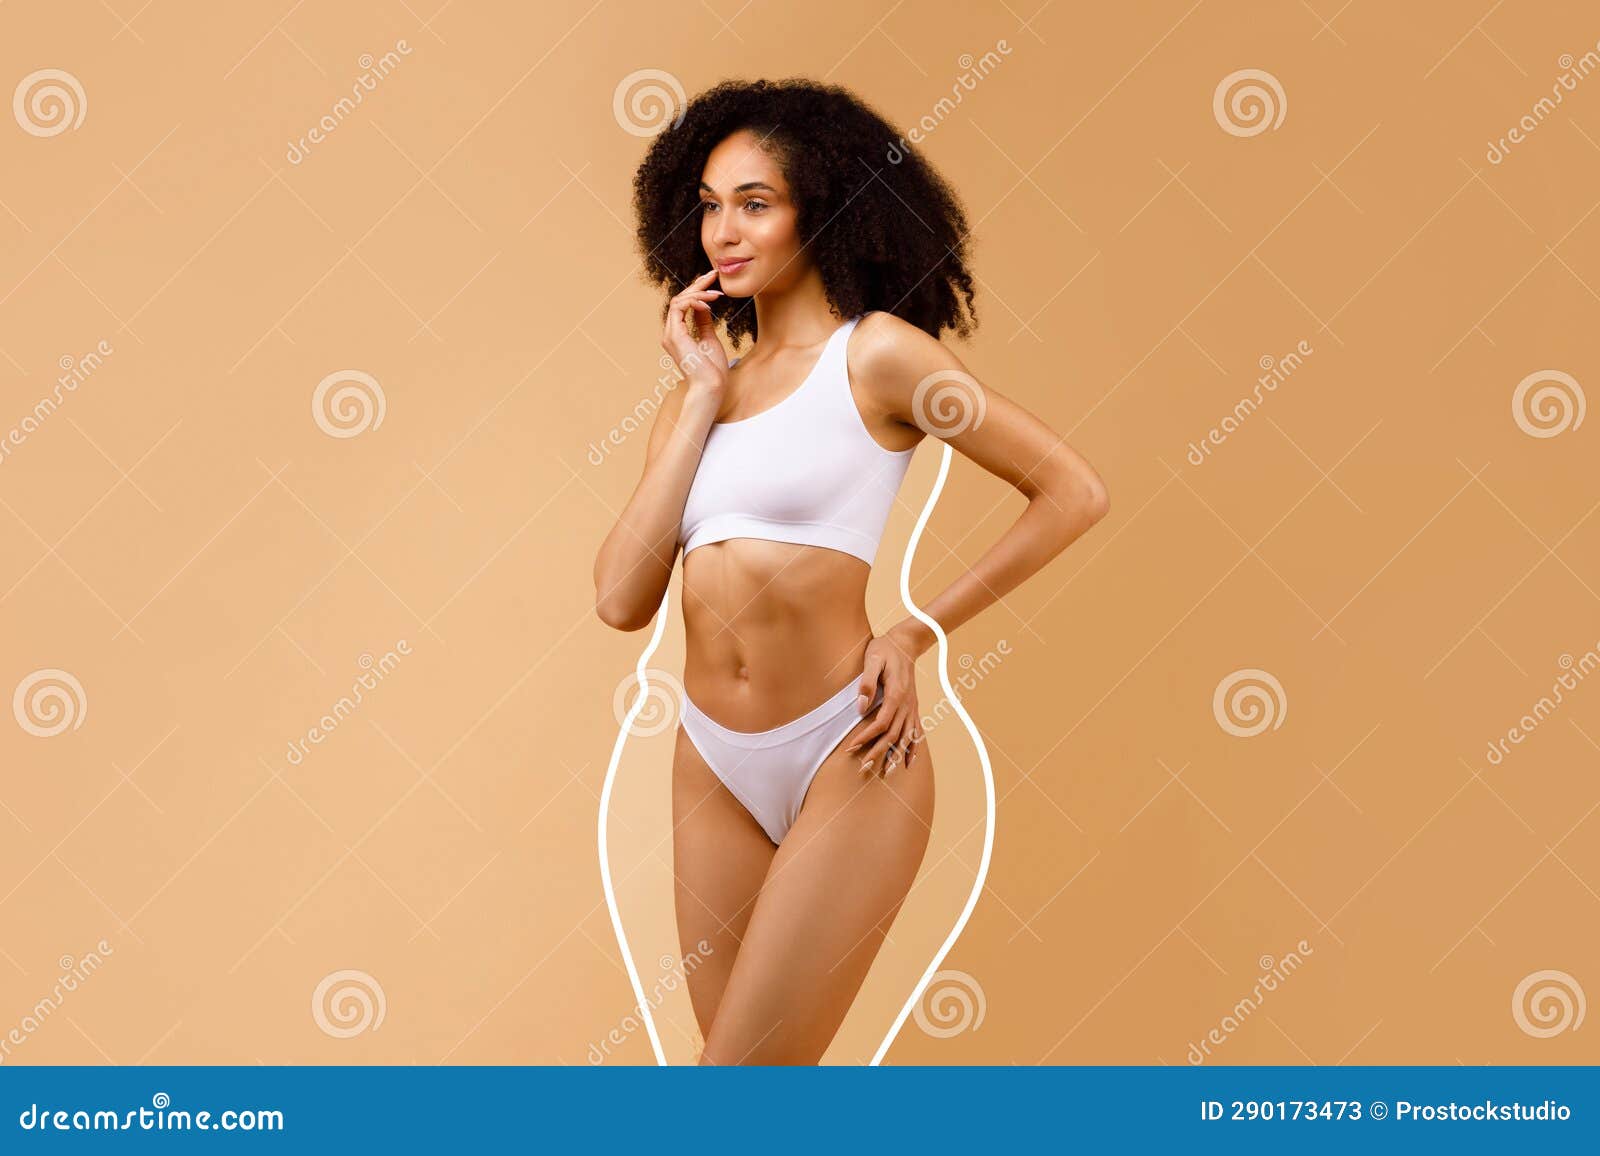 Slim Black Lady with Perfect Body Shape Posing in Underwear Stock Image -  Image of flat, body: 290173473